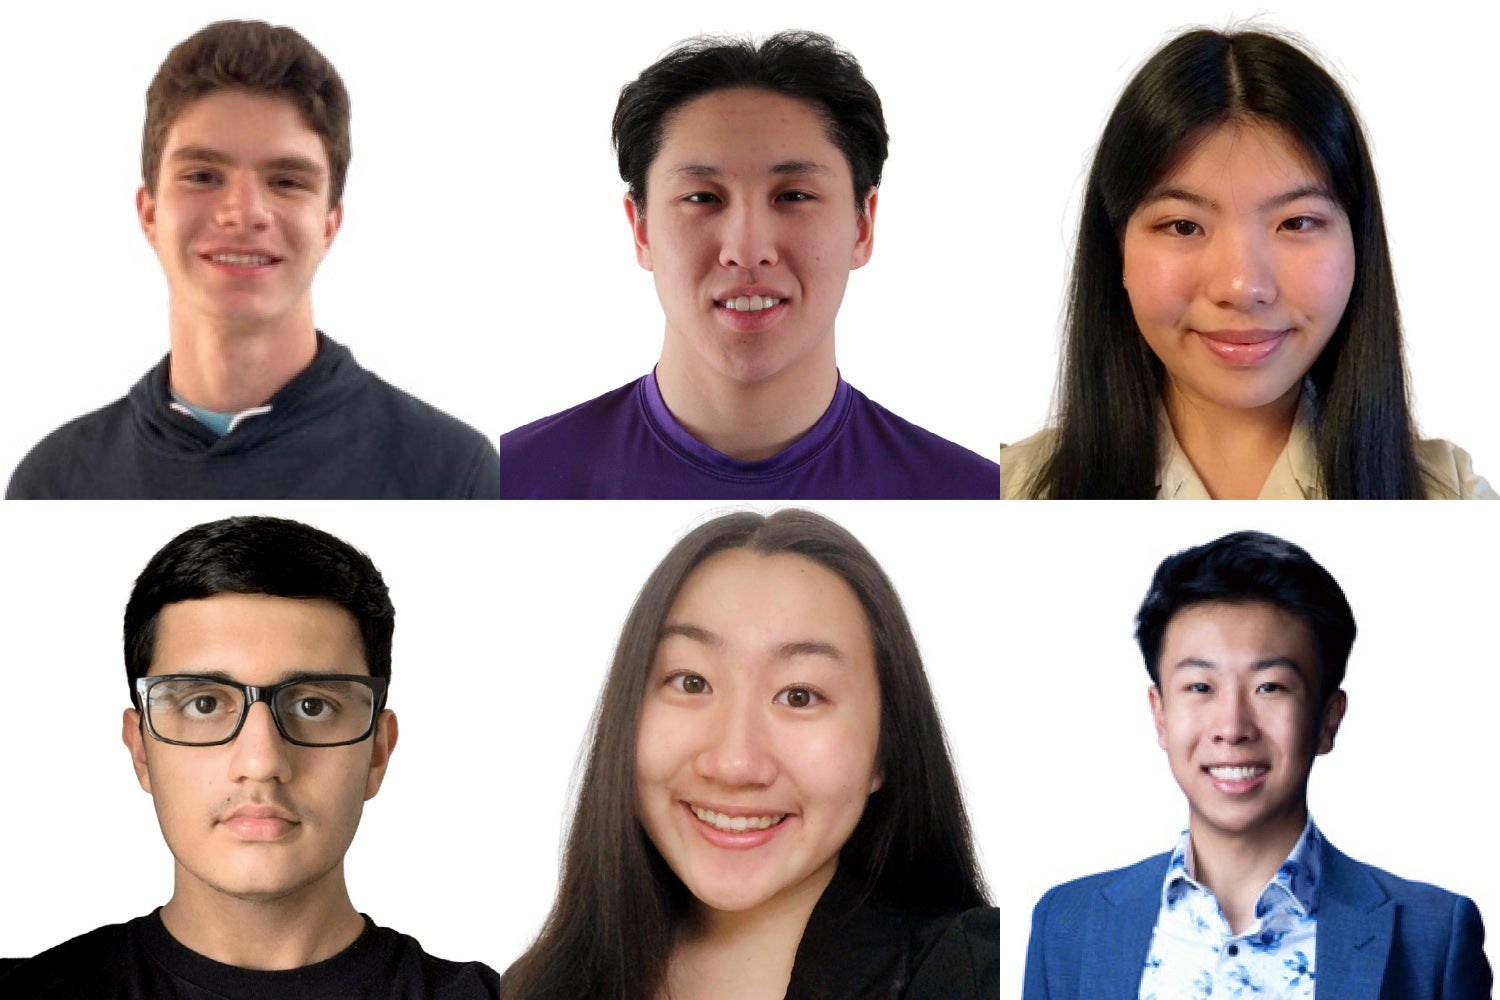 composite photo of 2022 Schulich Leaders who will be studying computer science and software engineering